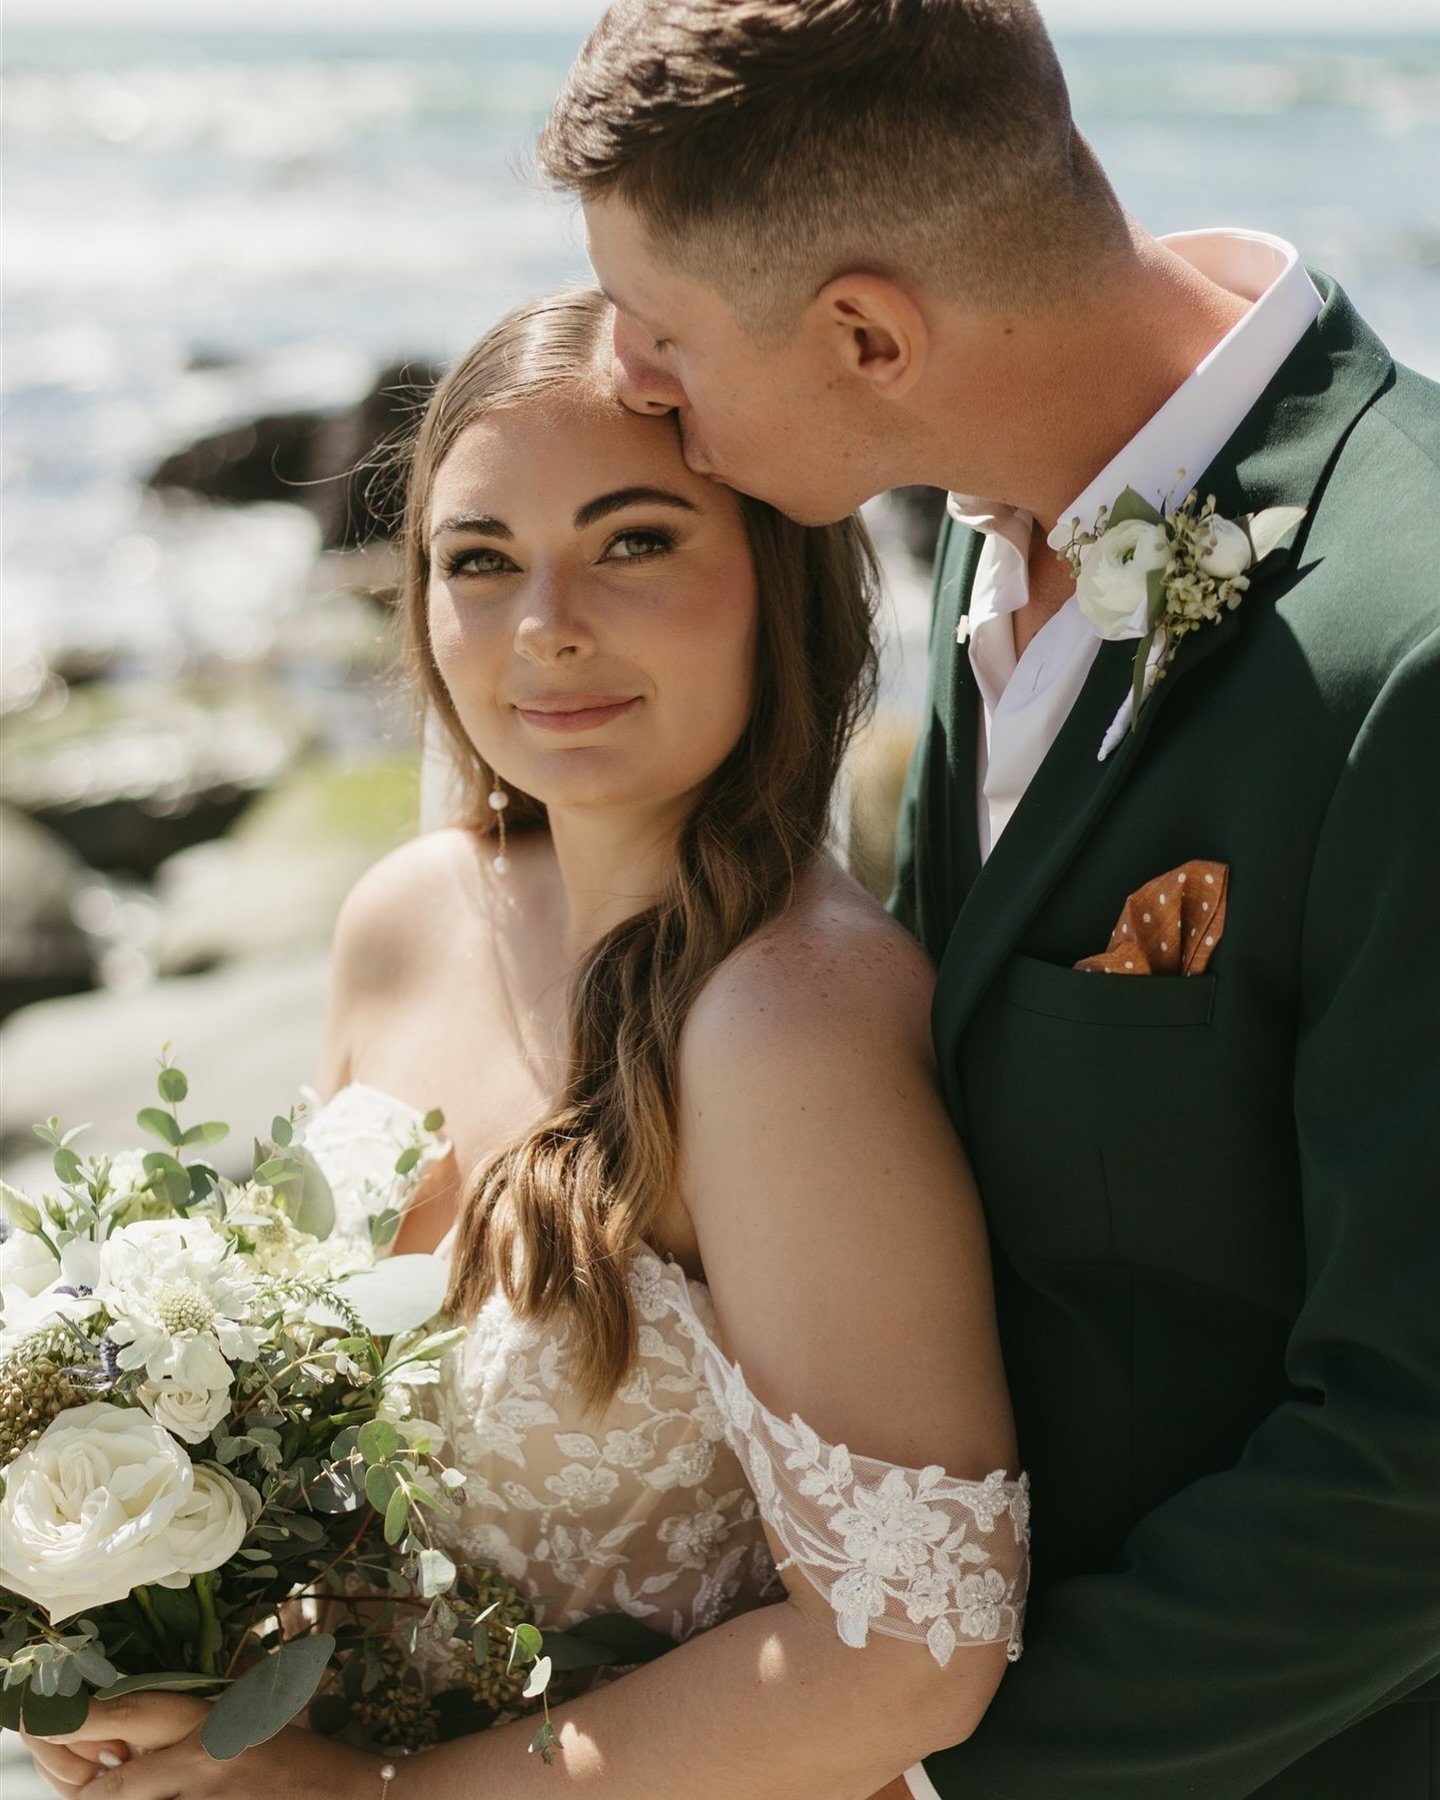 Gallery delivery day for this beautiful couple&rsquo;s stunning morning ceremony 🫶🏼

-

Dana Point wedding ceremony photography with a beach view at Chart House restaurant by Dana Point Harbor | Orange County Professional wedding photographer 

#oc